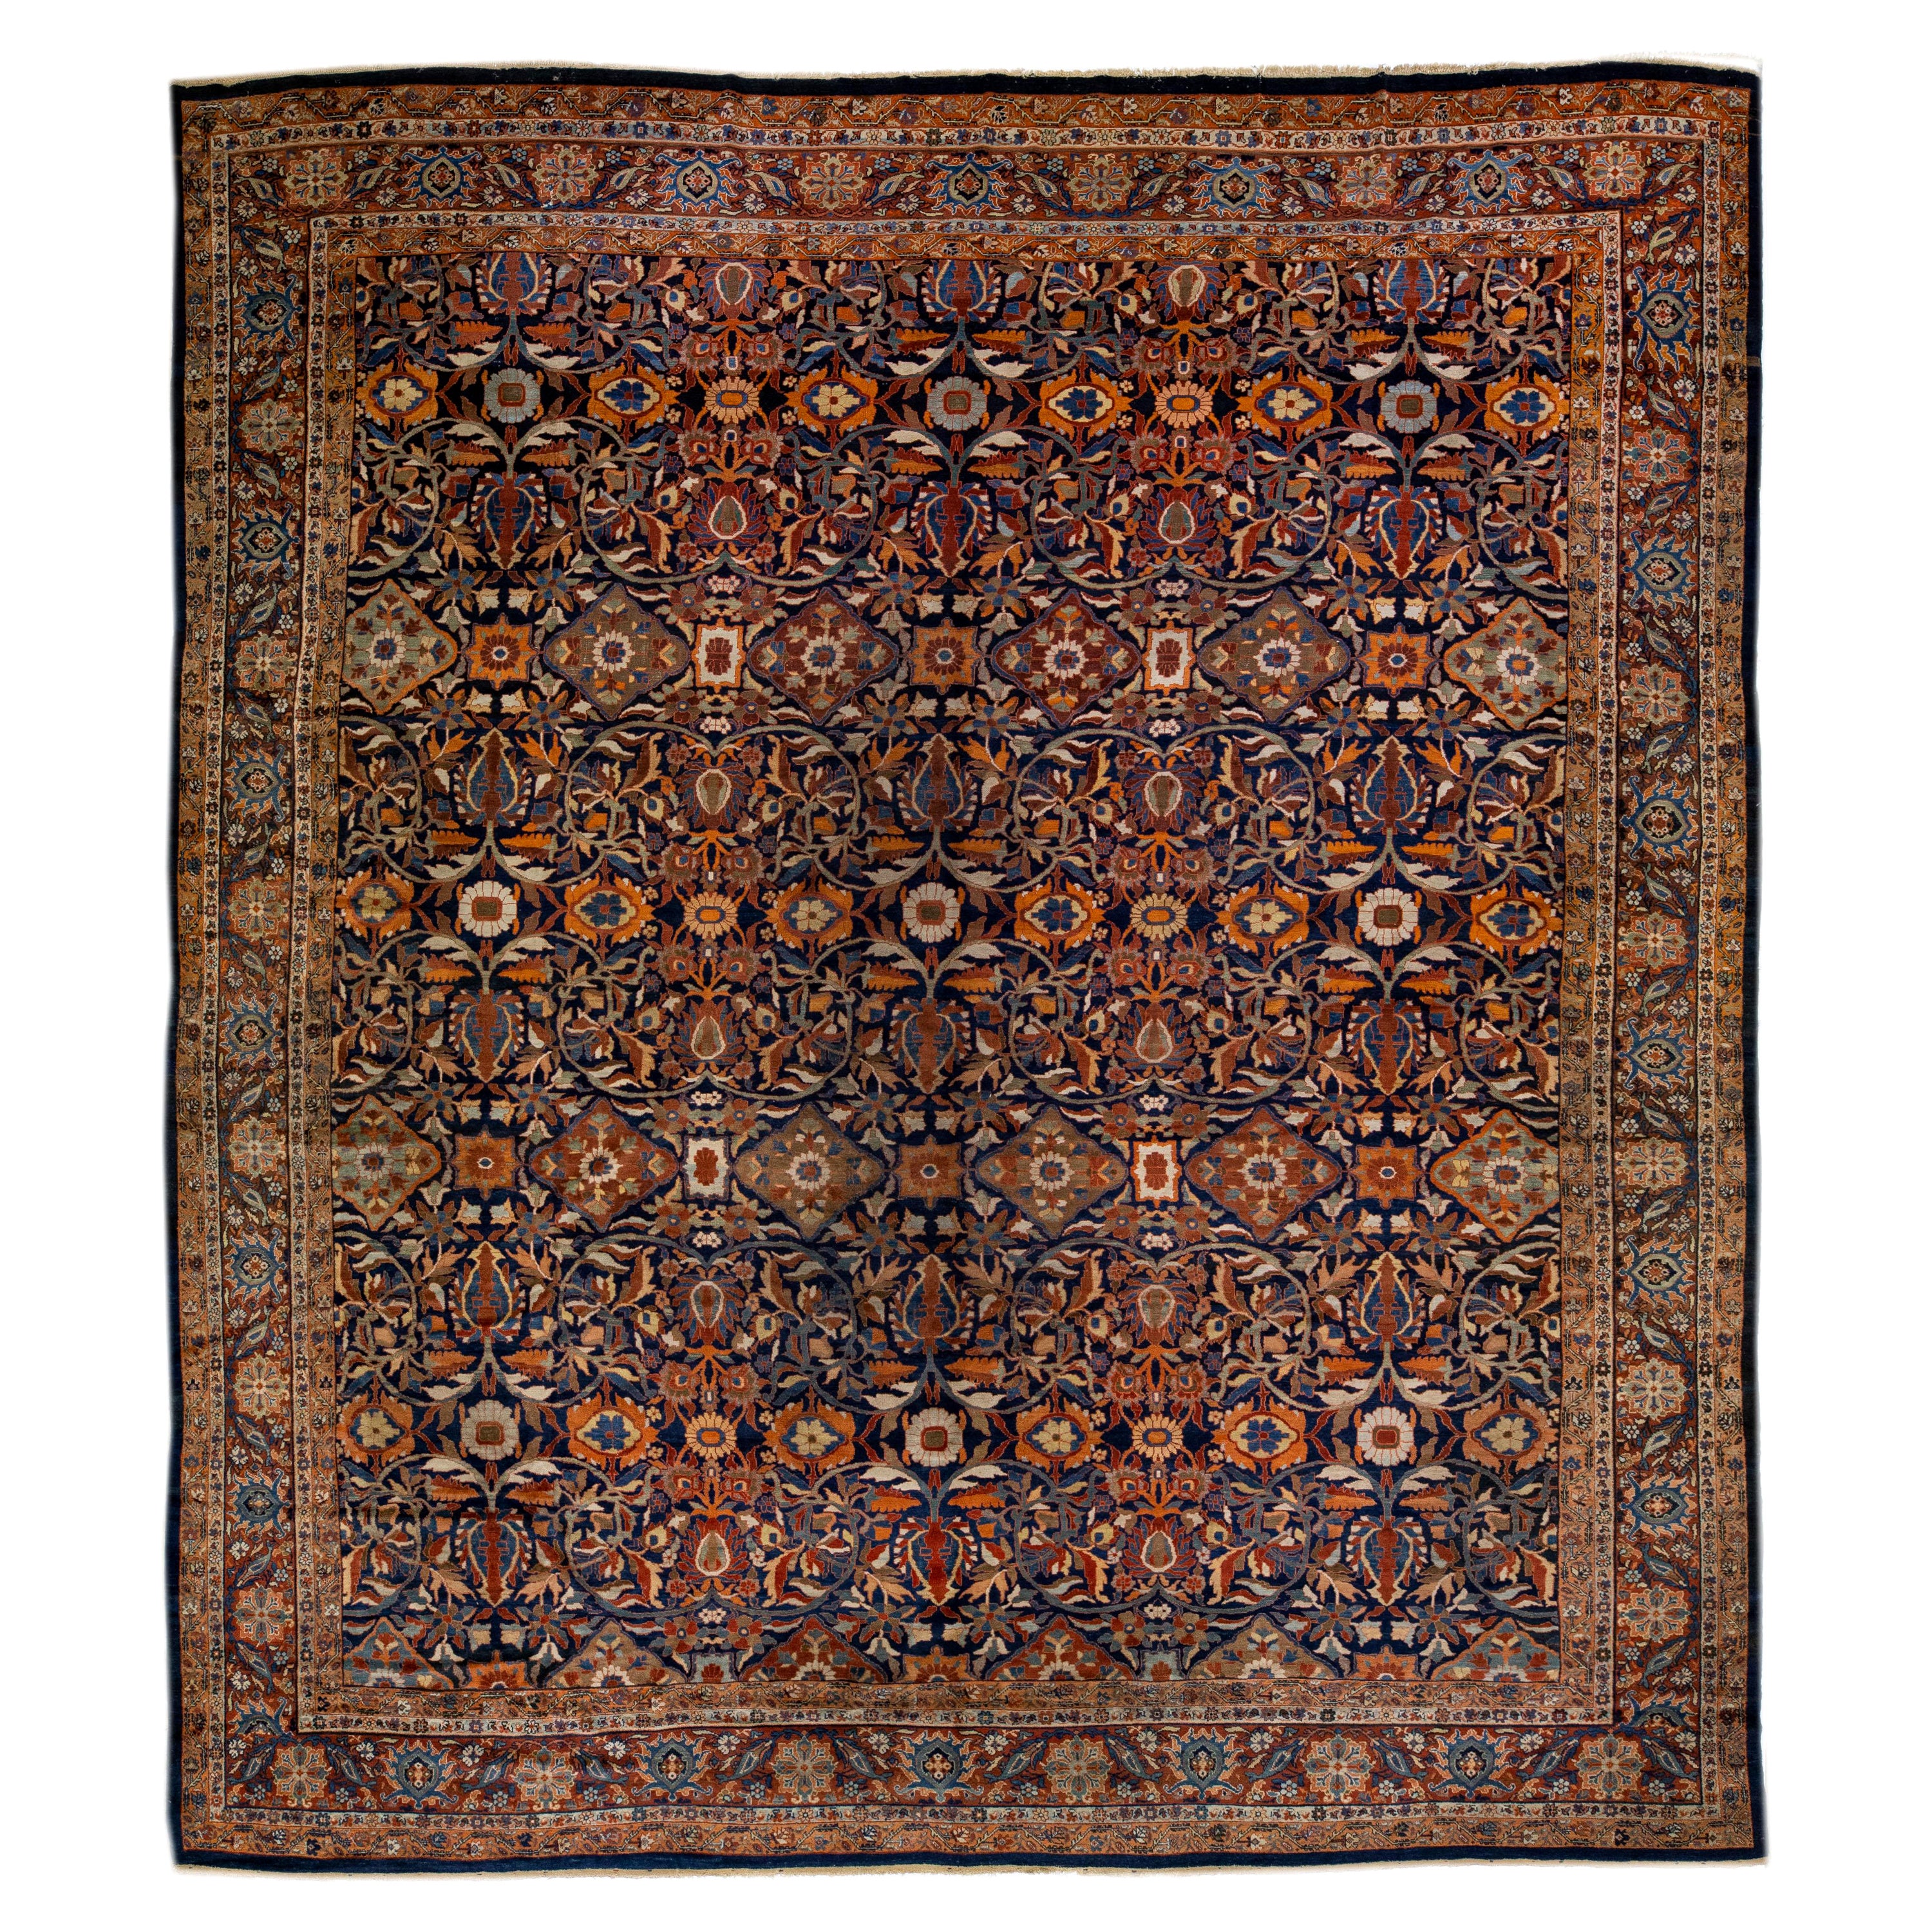 Oversize Antique Sultanabad Multicolor Handmade Allover Floral Persian Wool Rug  For Sale